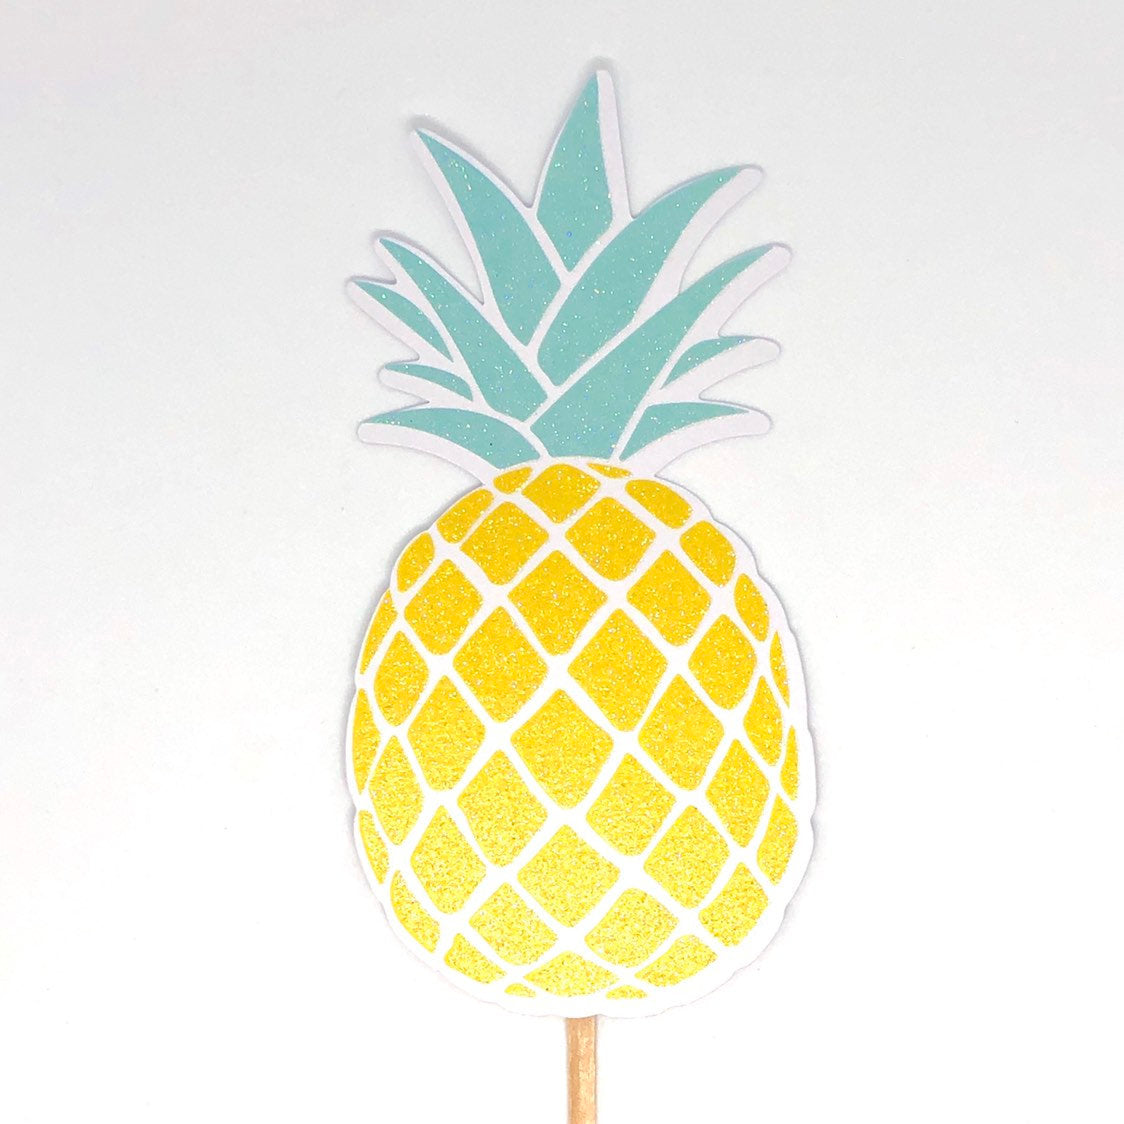 Big Glittery Pineapple Cupcake Toppers